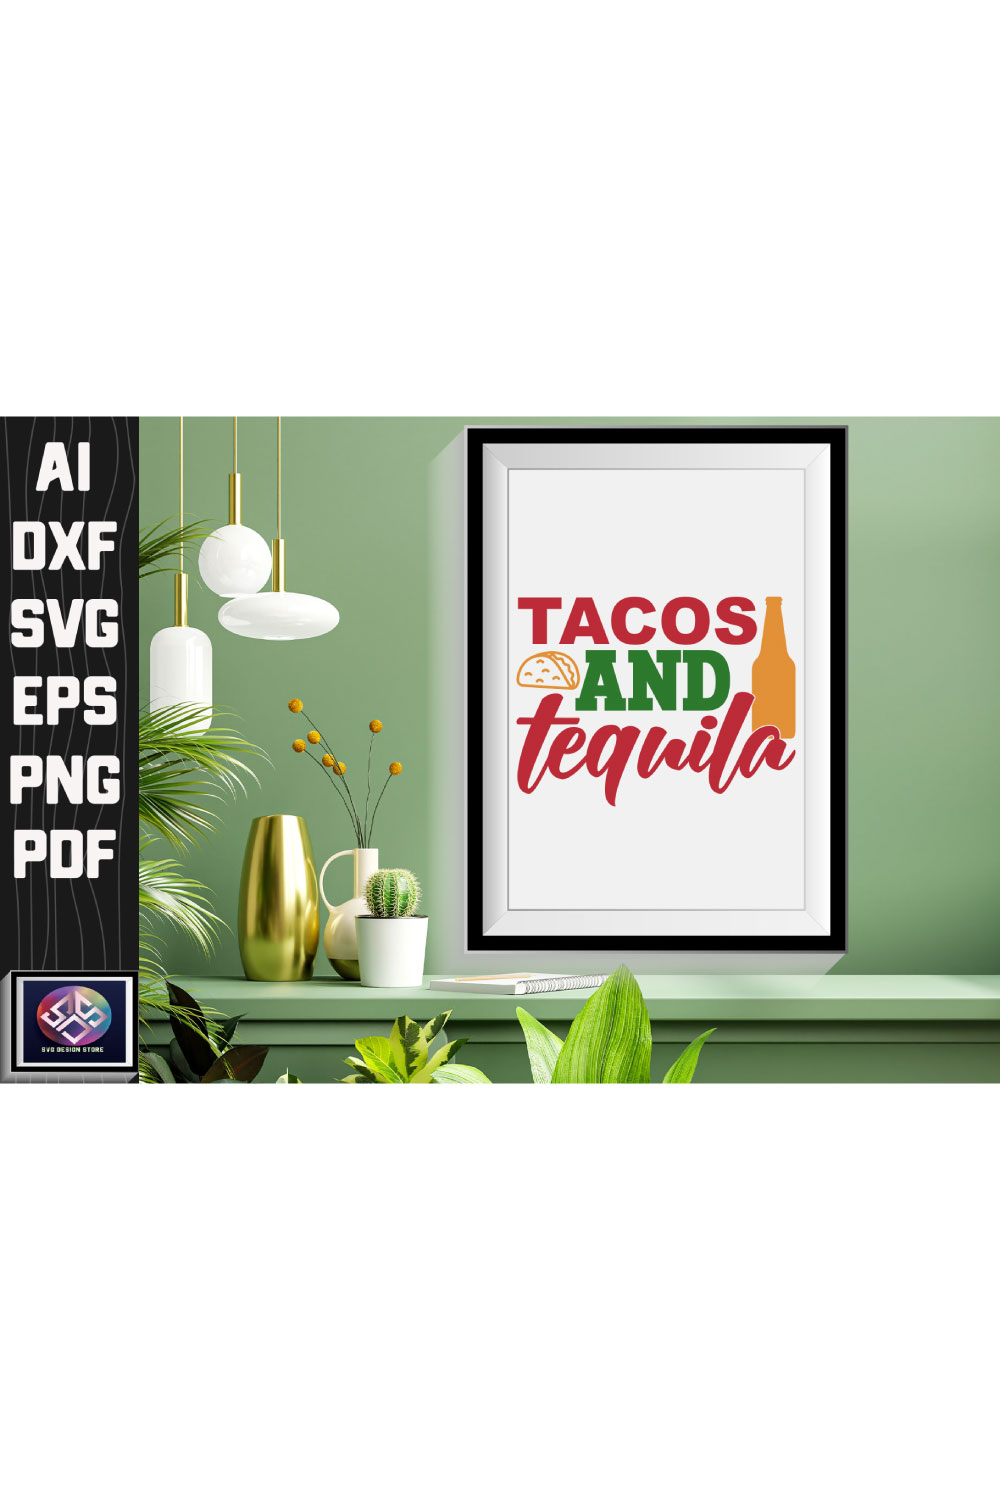 Picture of a picture of tacos and tequila.